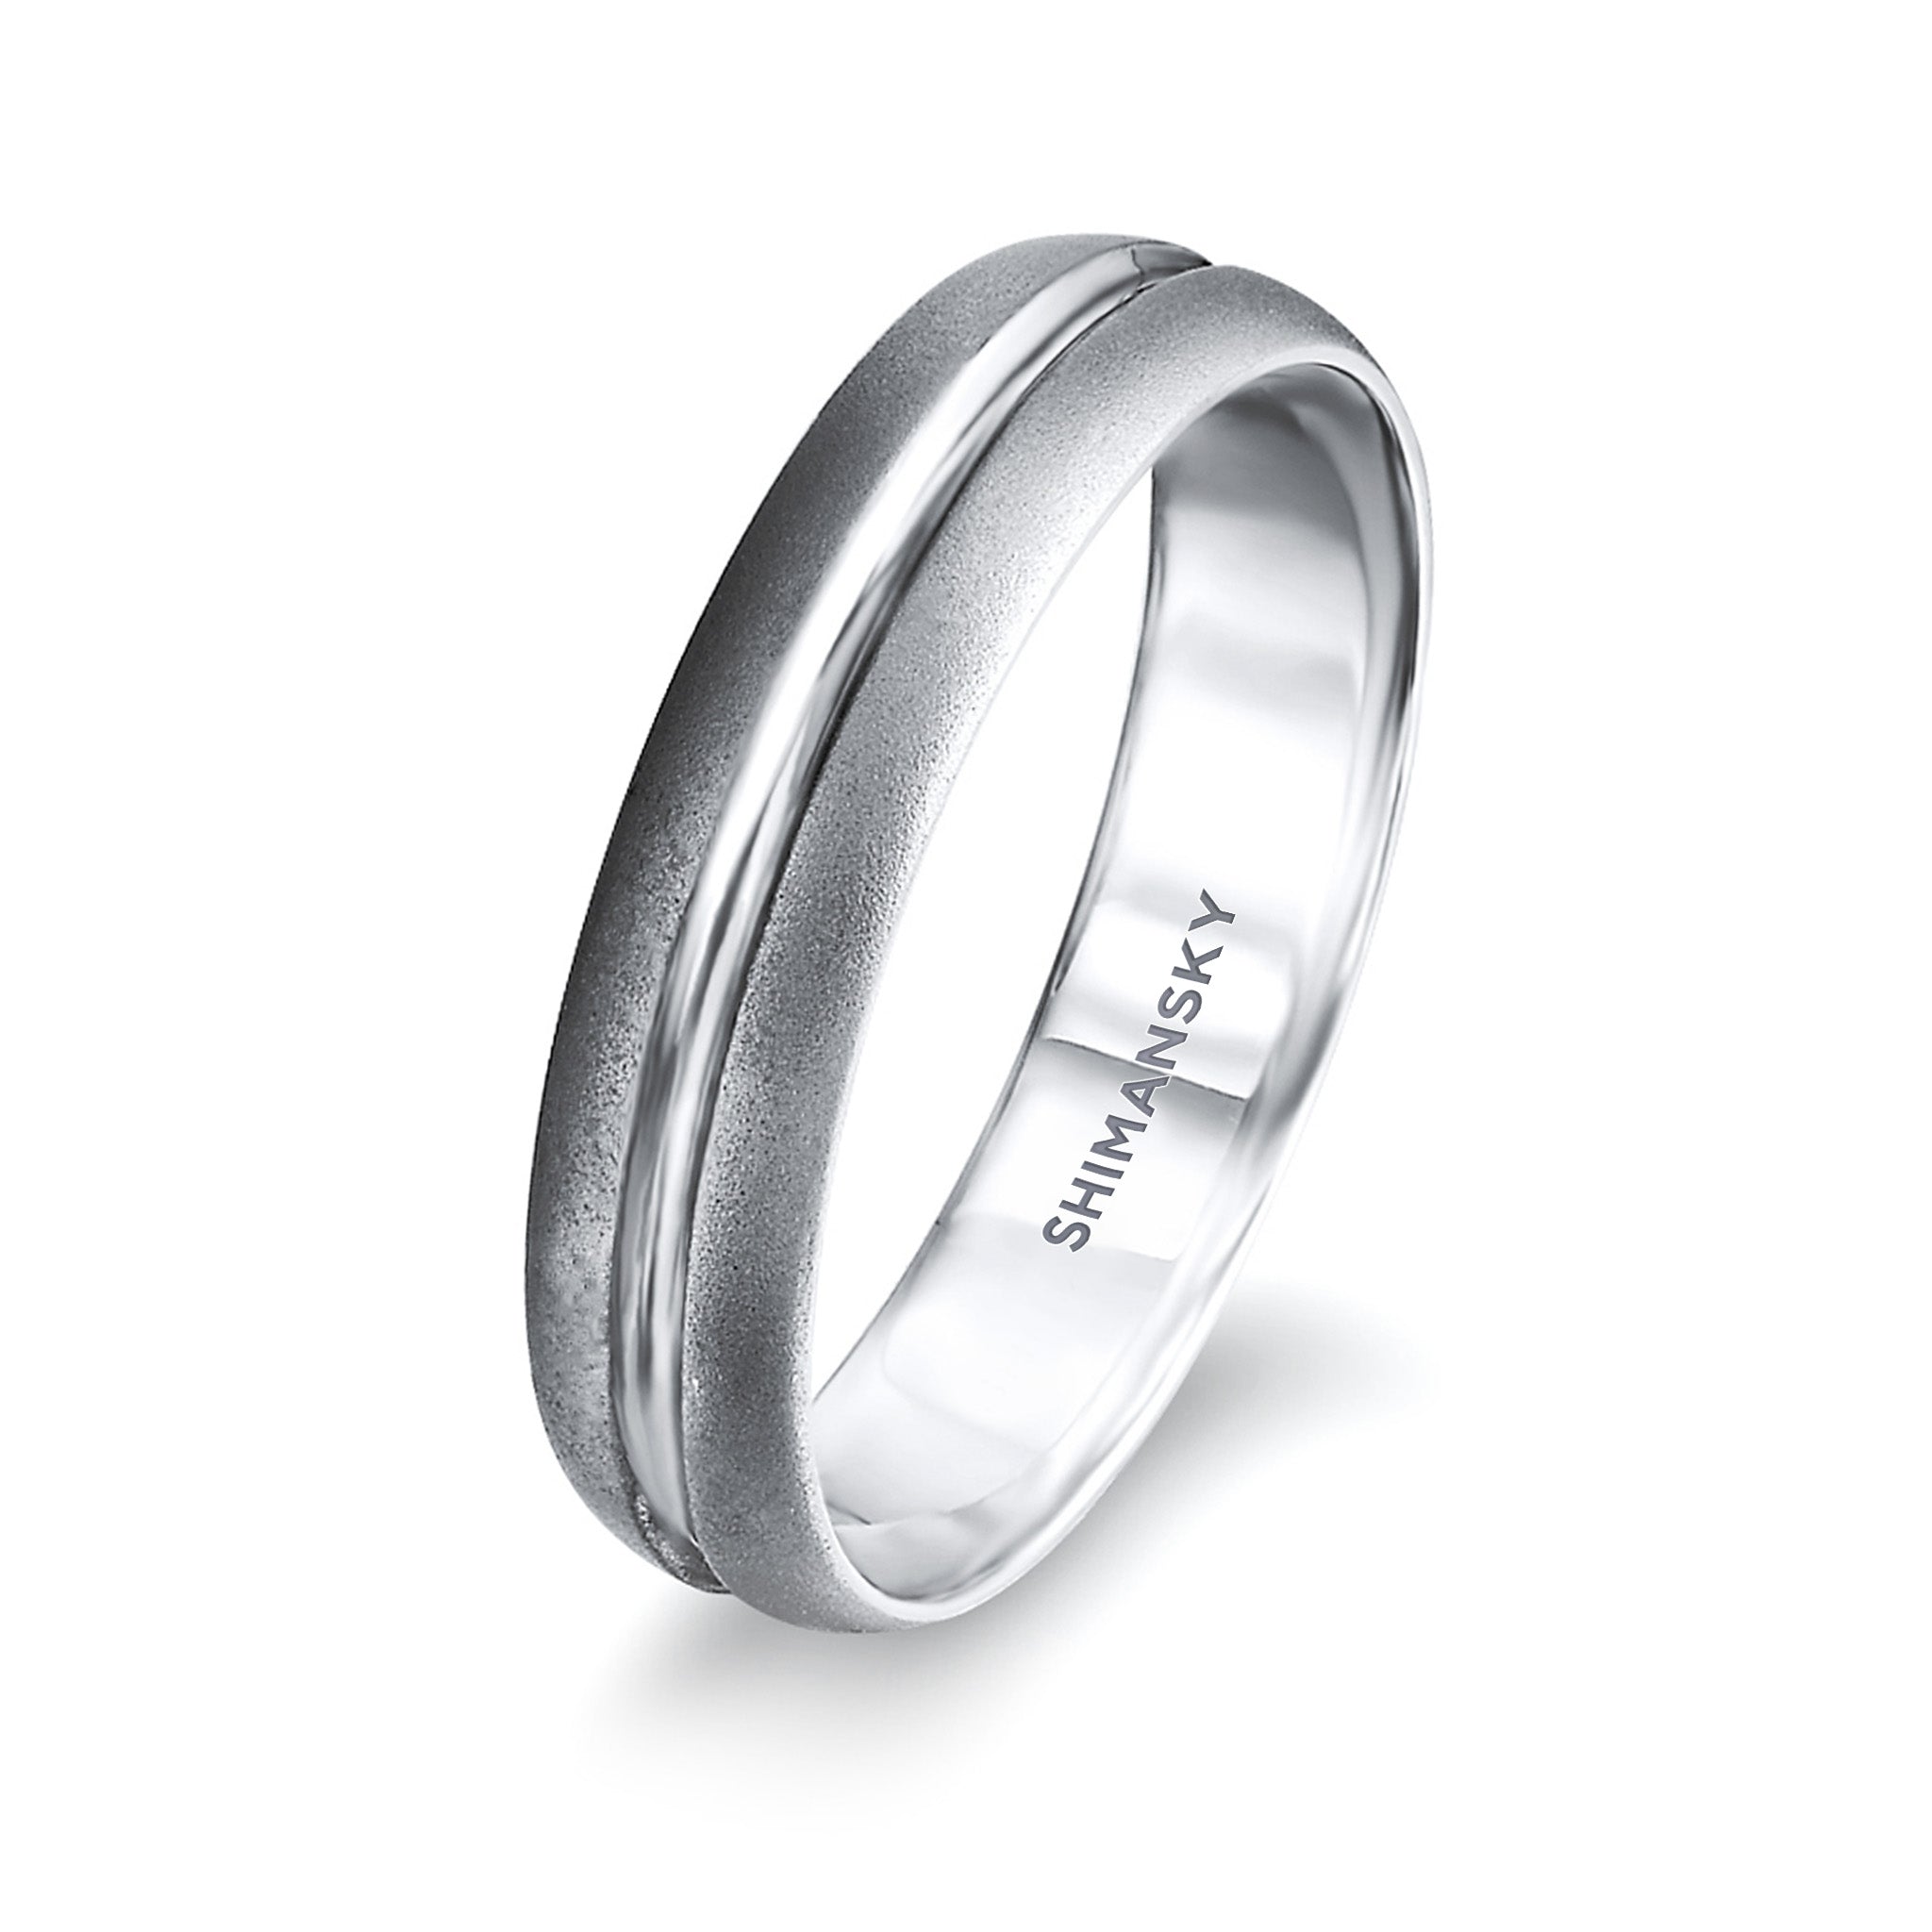 Shimansky - Max-line Single Groove Rounded Wedding Band in Brushed Palladium